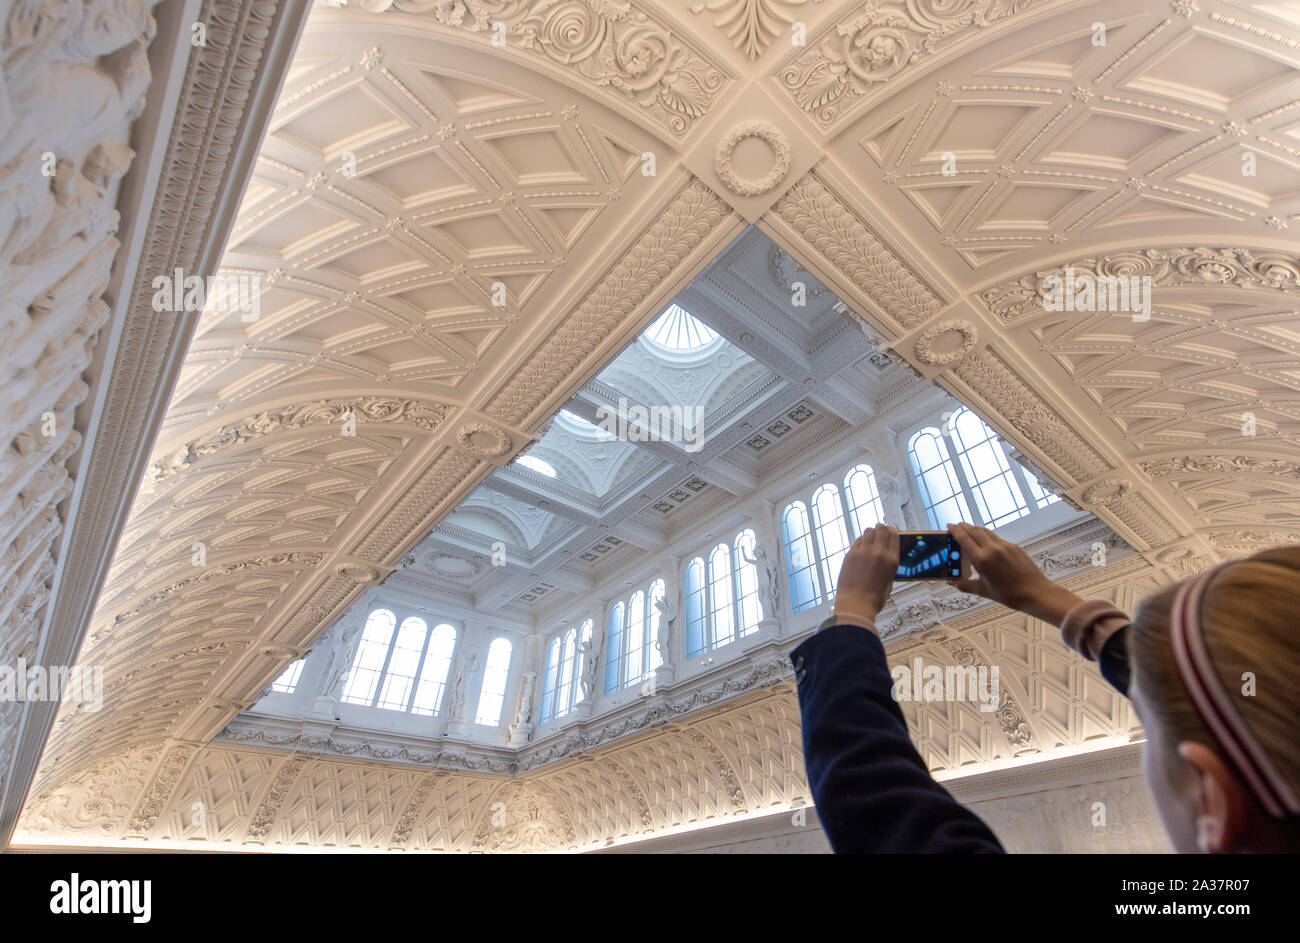 A person takes a photo of the newly refurbished Grade 1 listed ceiling in the main gallery at the Fitzwilliam Museum in Cambridge, featuring ornate plasterwork and casts of the Parthenon Frieze, widely considered to be one of the finest museum interiors in the world. Stock Photo